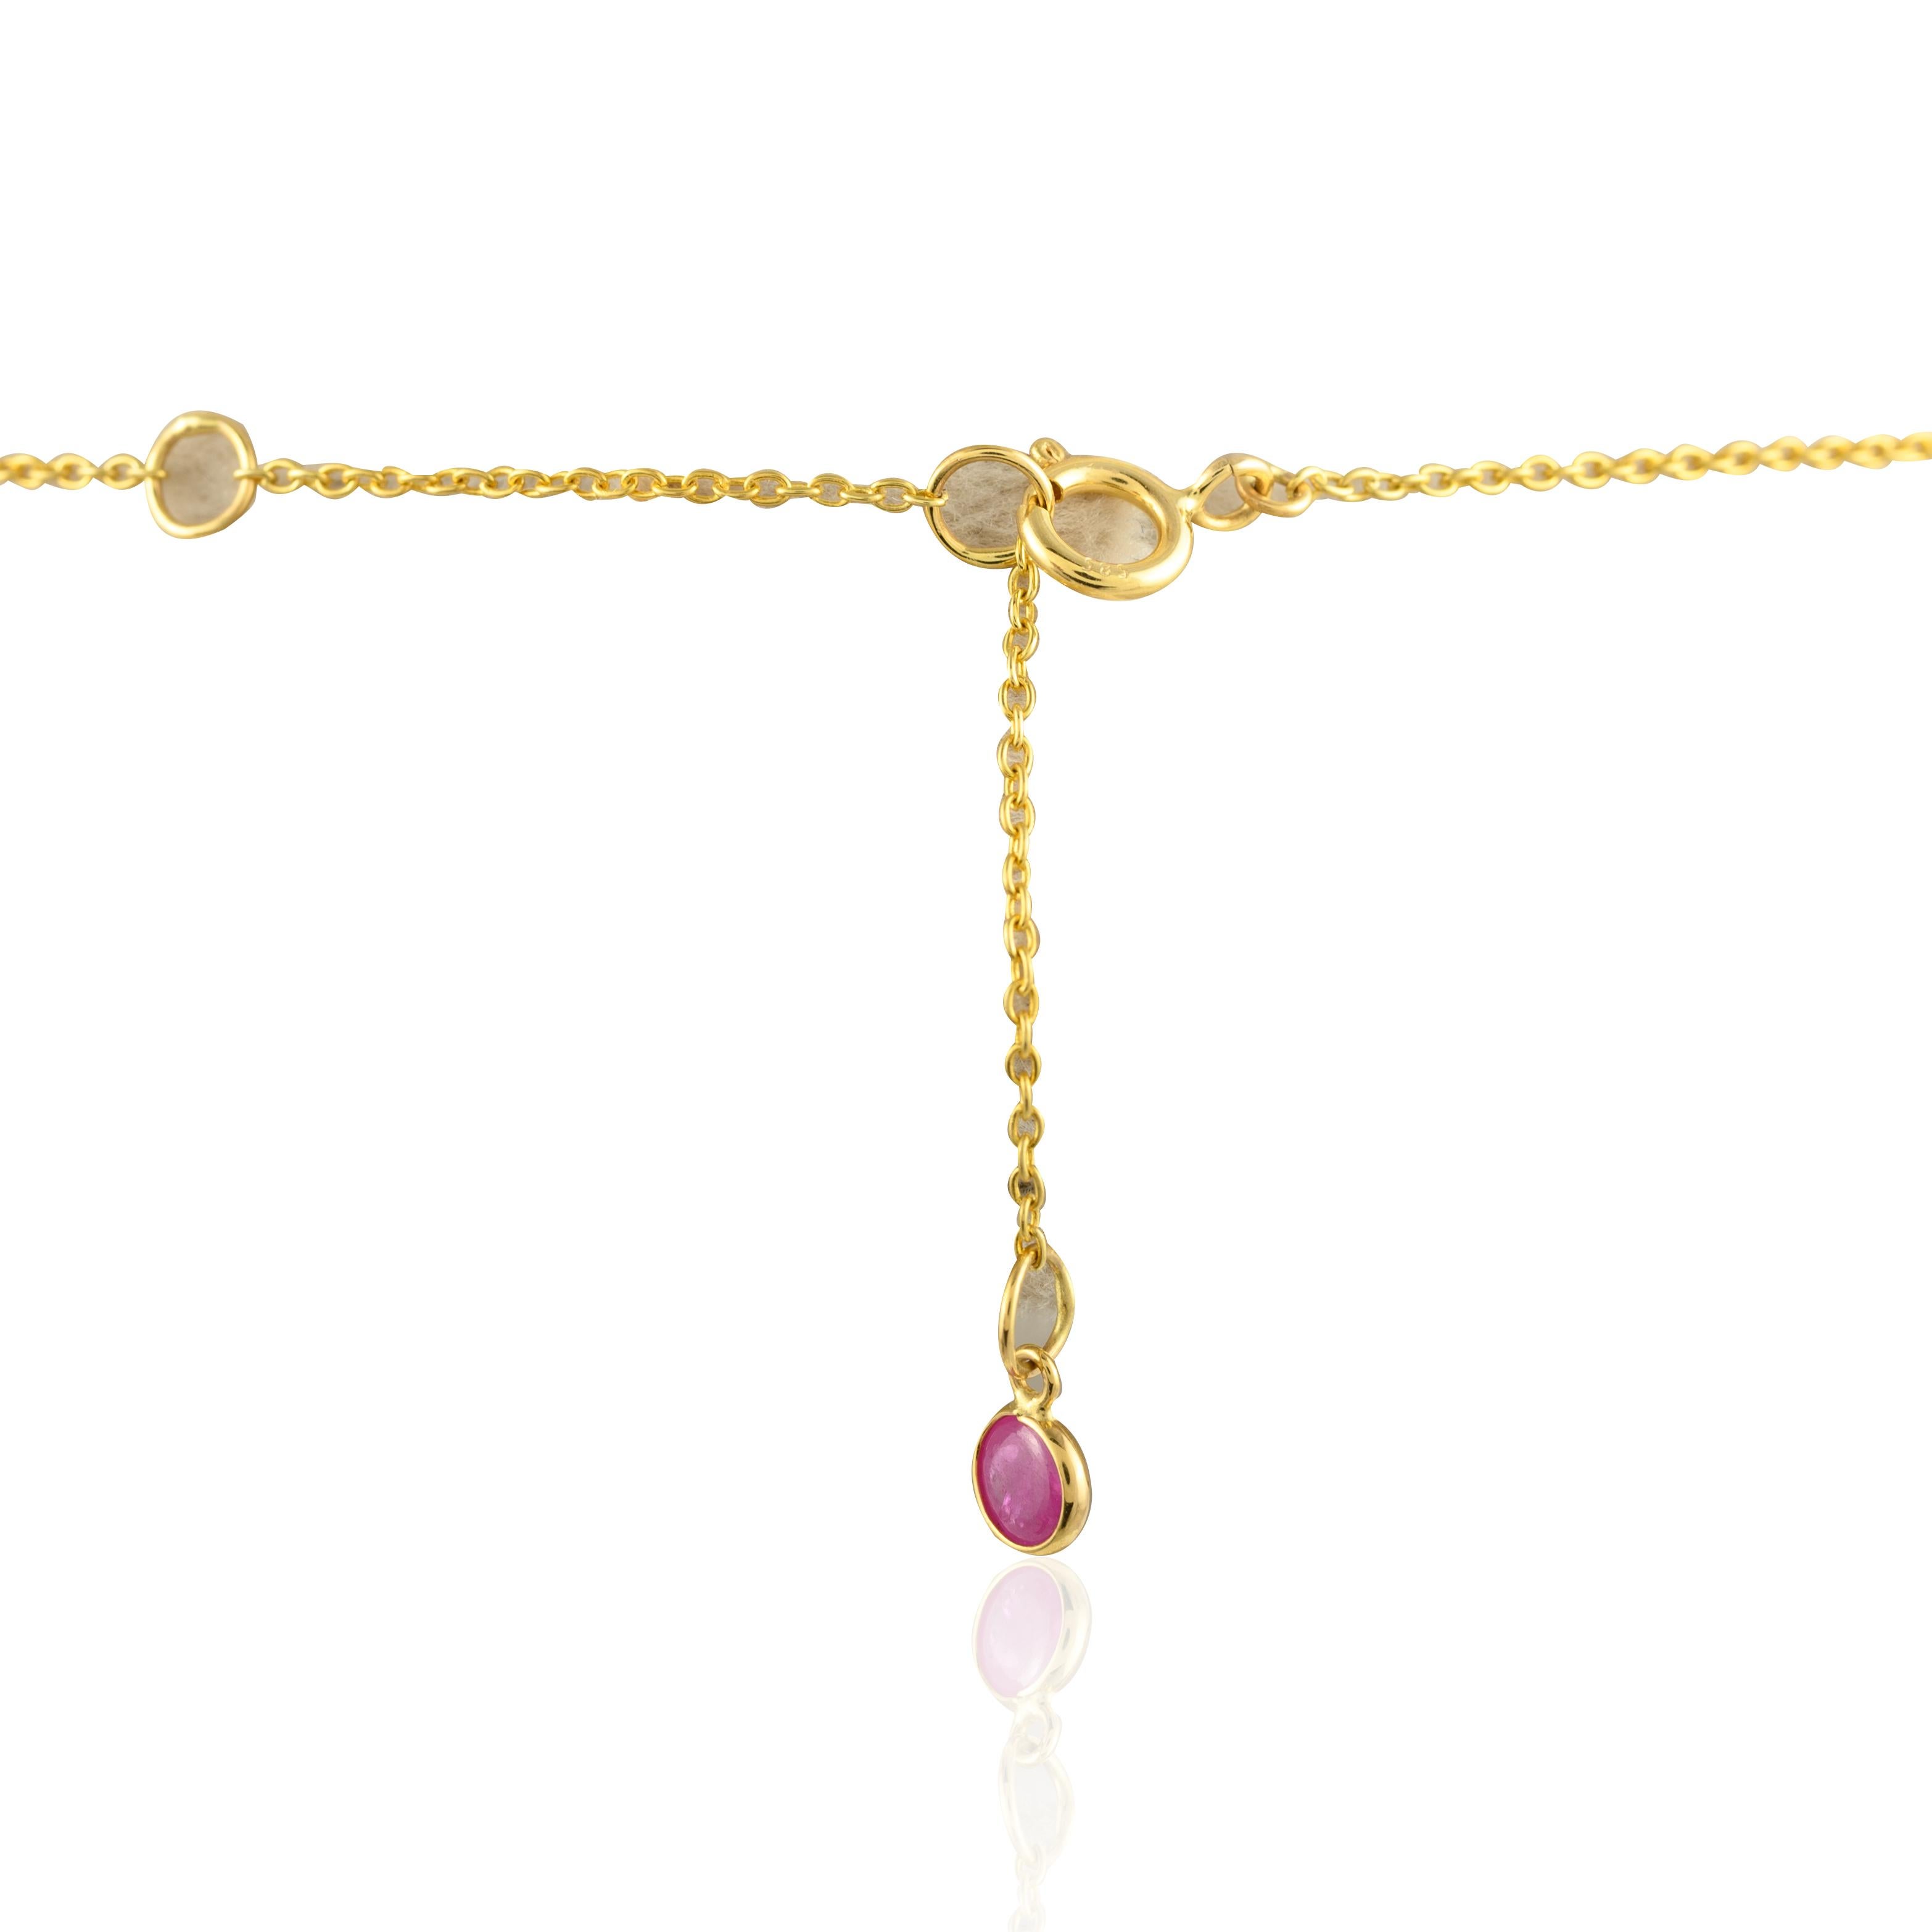 Real Ruby Station Chain Necklace 14k Solid Yellow Gold, Christmas Gift For Her 1